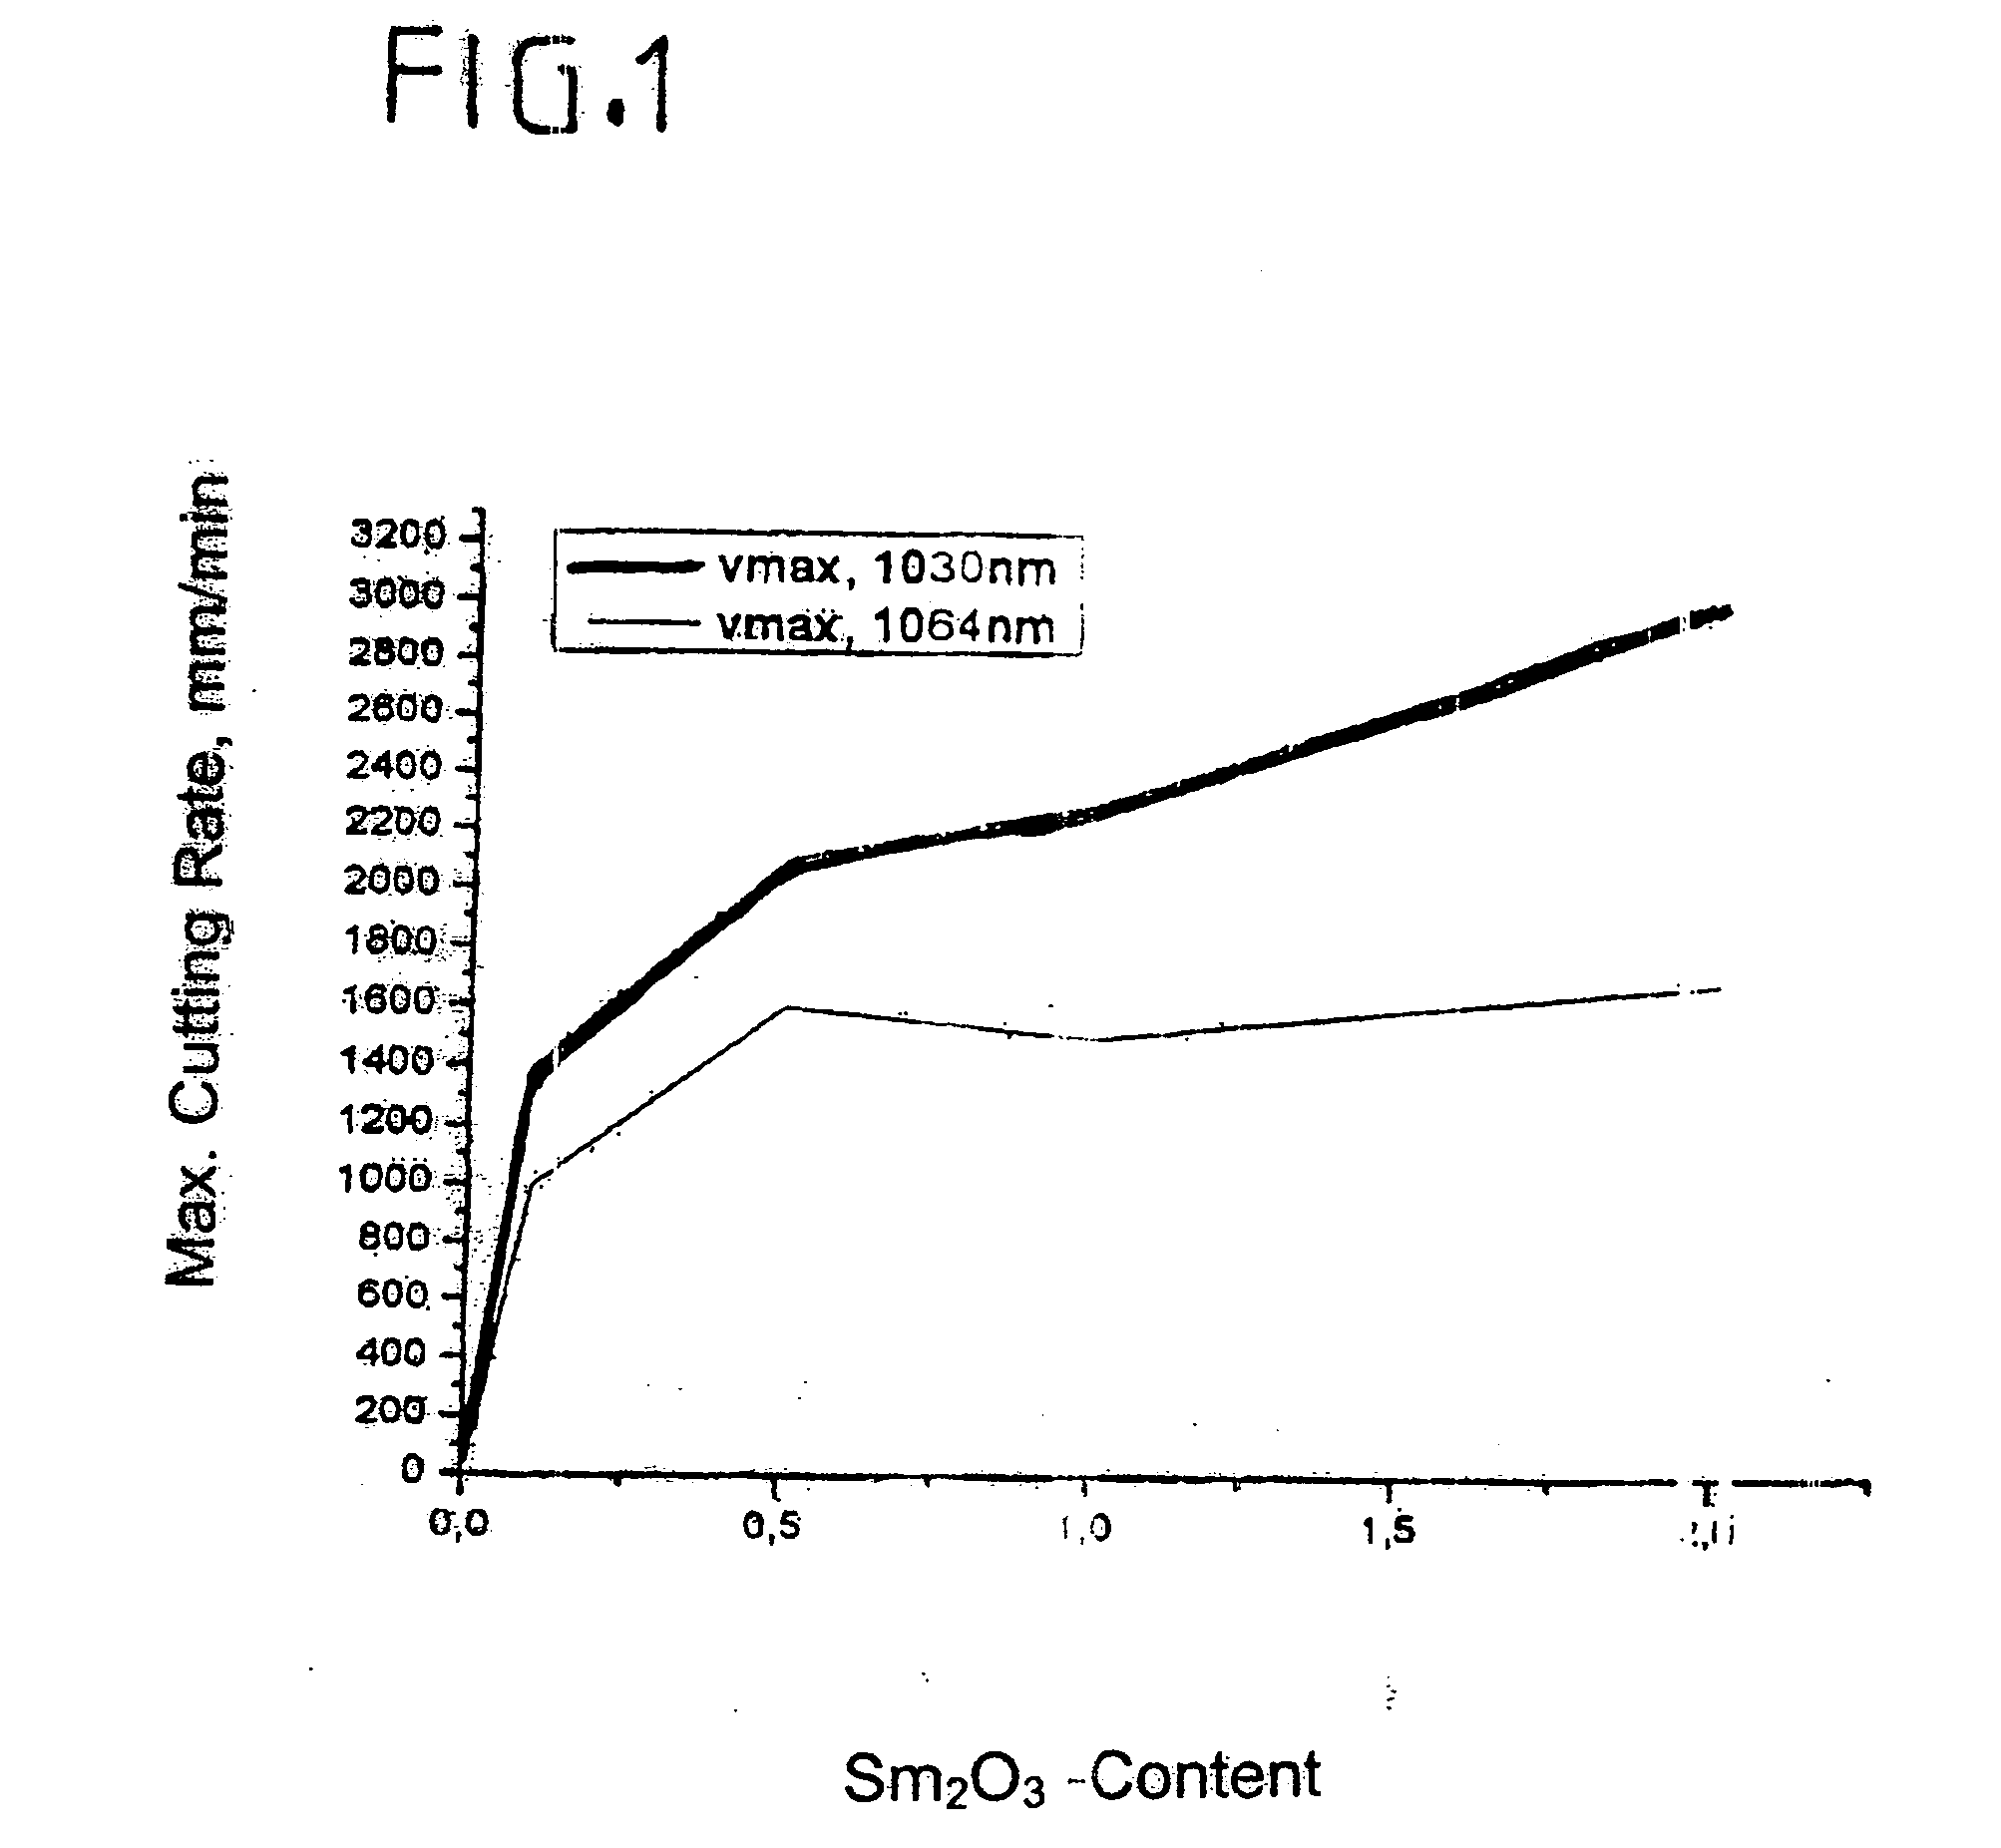 Thin flat glass for display purposes and method of cutting the thin flat glass into display sheets